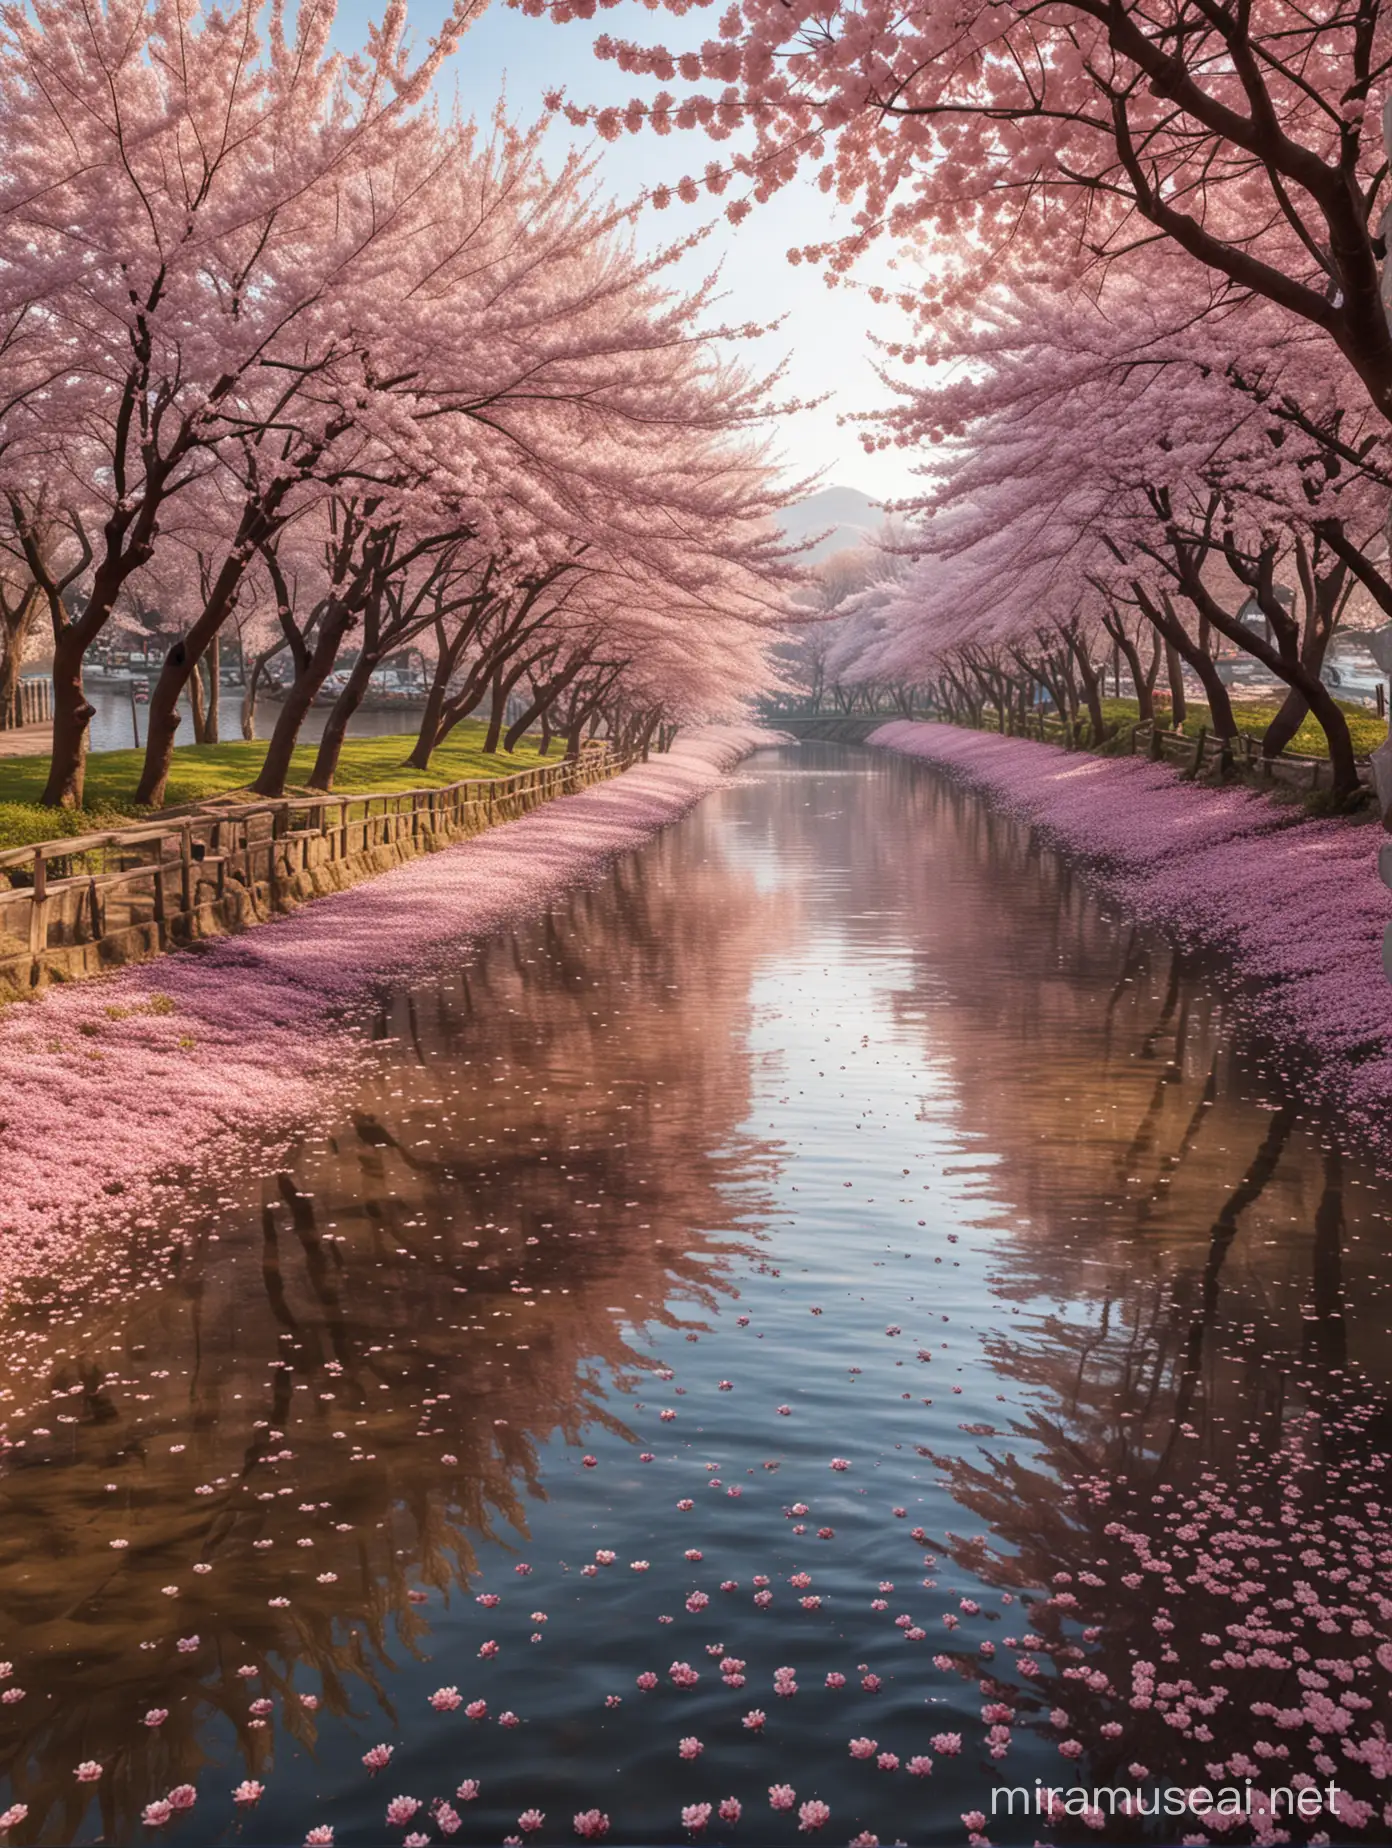 A breathtakingly beautiful real-life photograph of a river lined with fully bloomed cherry blossom trees, the water surface is covered with cherry blossom petals, sunlight filtering through the petals creating a serene and magical atmosphere, masterpiece,best quality, highres, 8K wallpaper